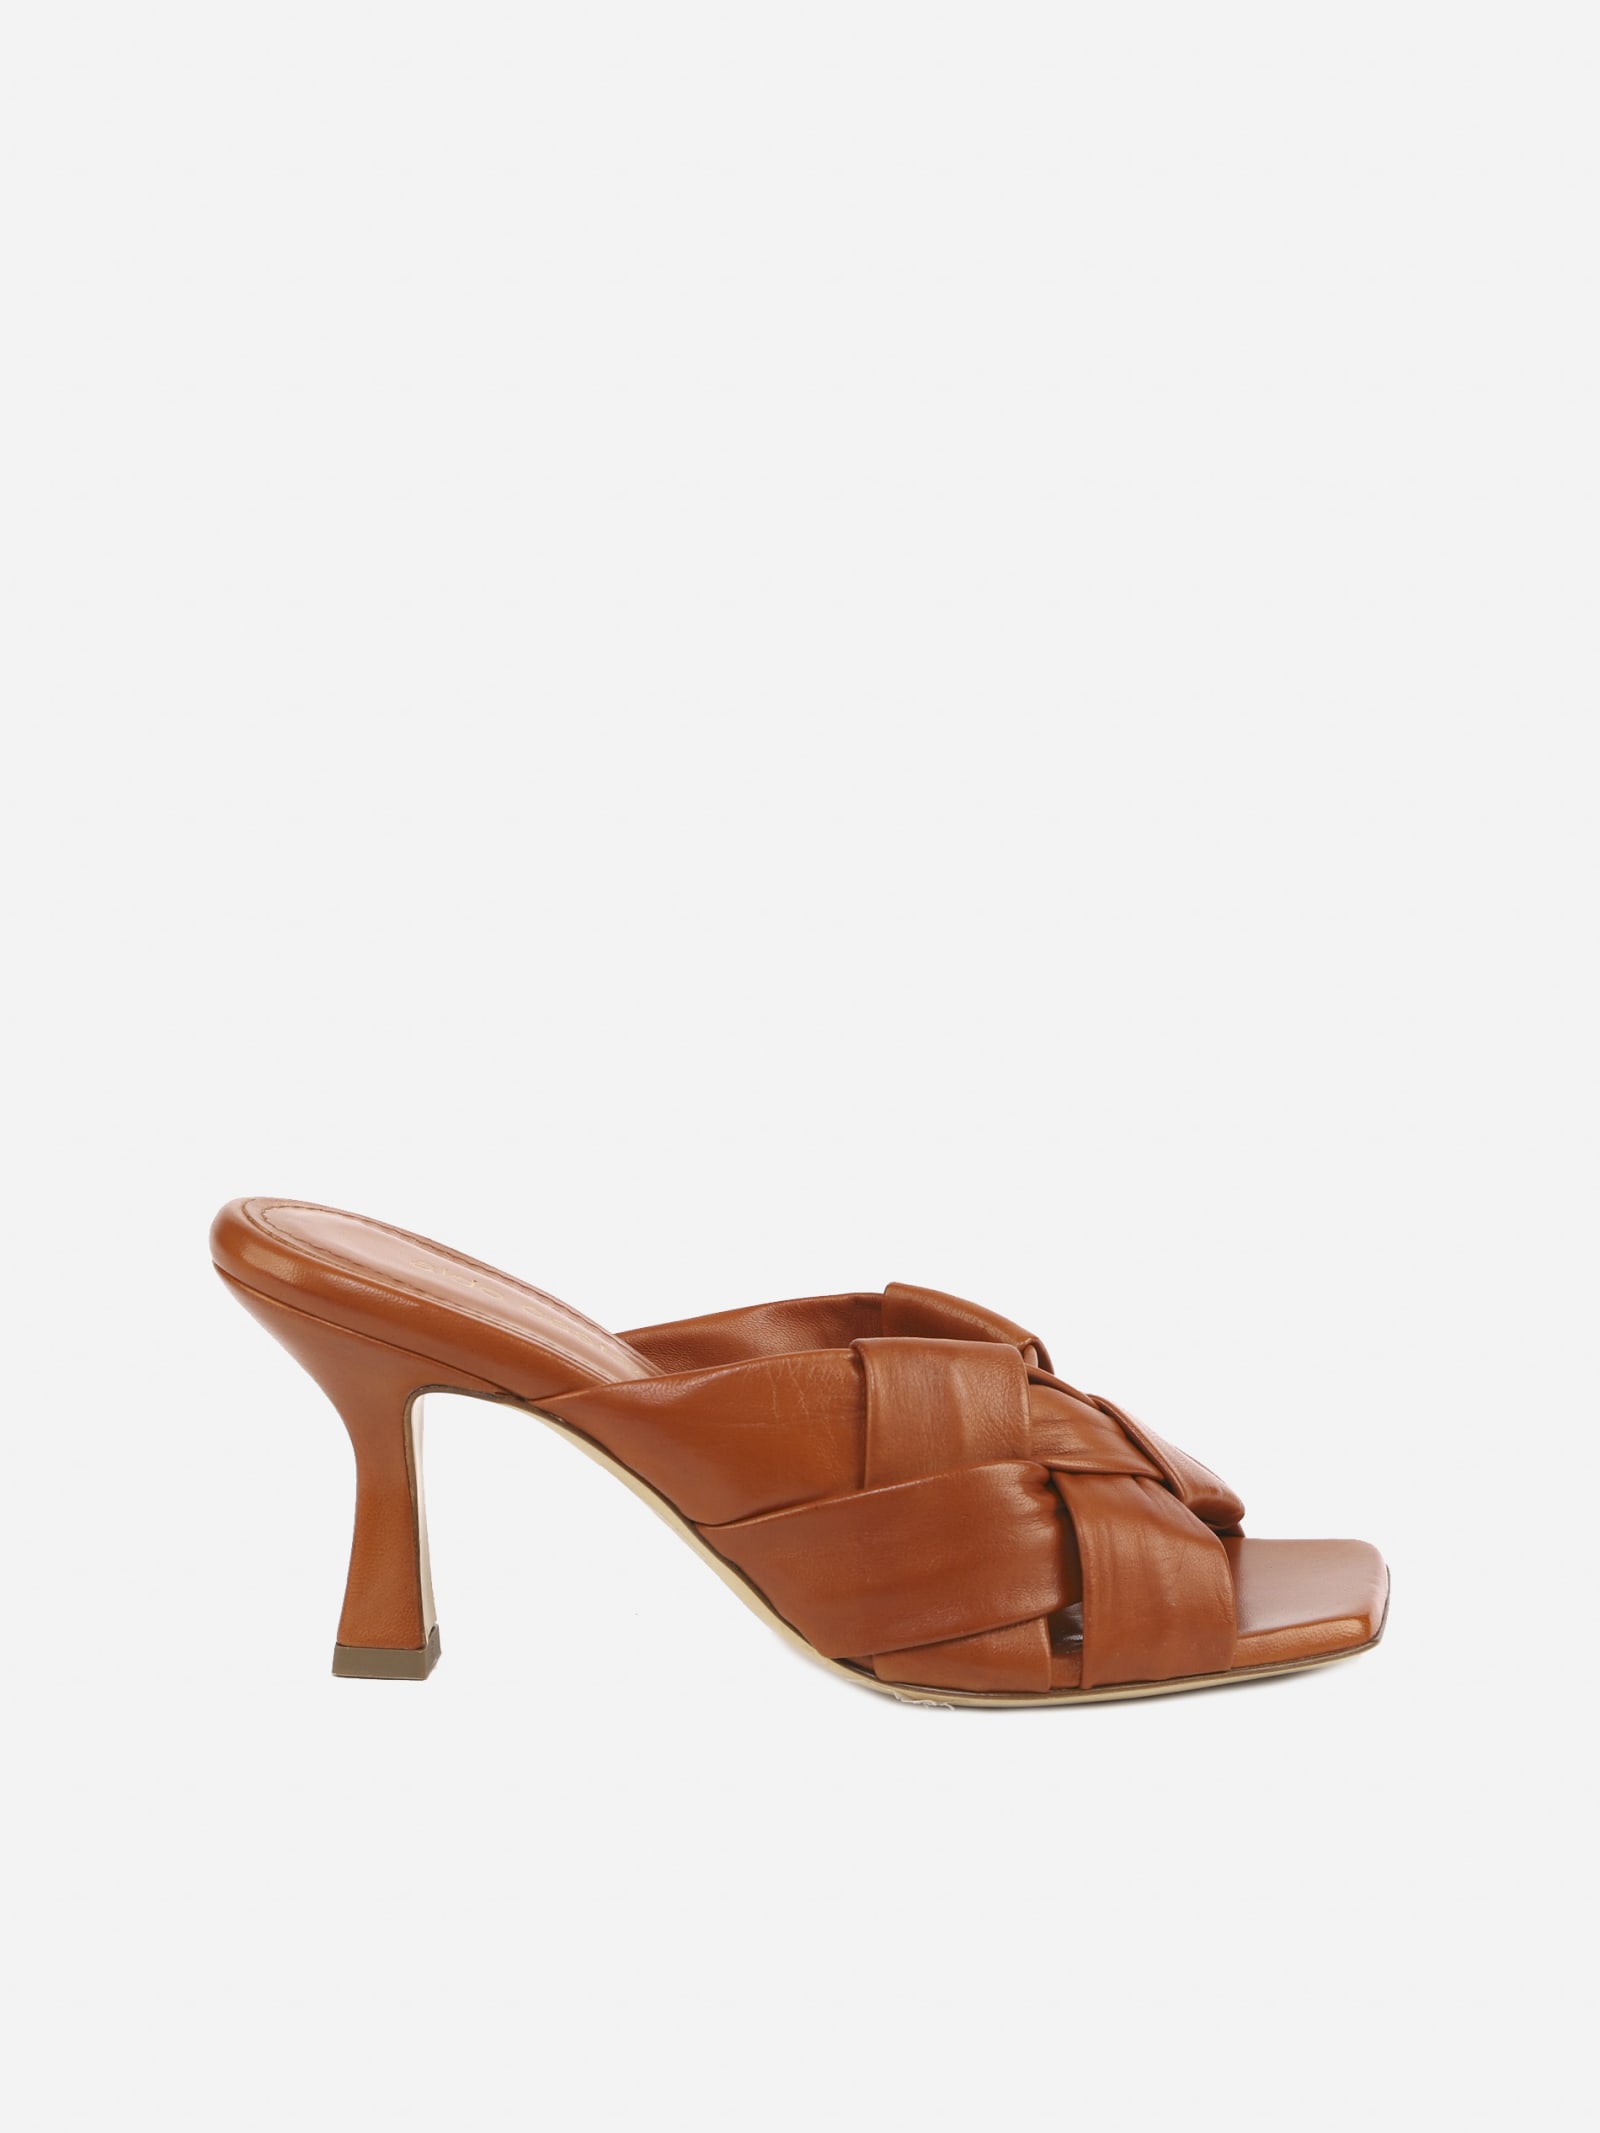 Aldo Castagna Flora Sandals In Leather With Woven Pattern